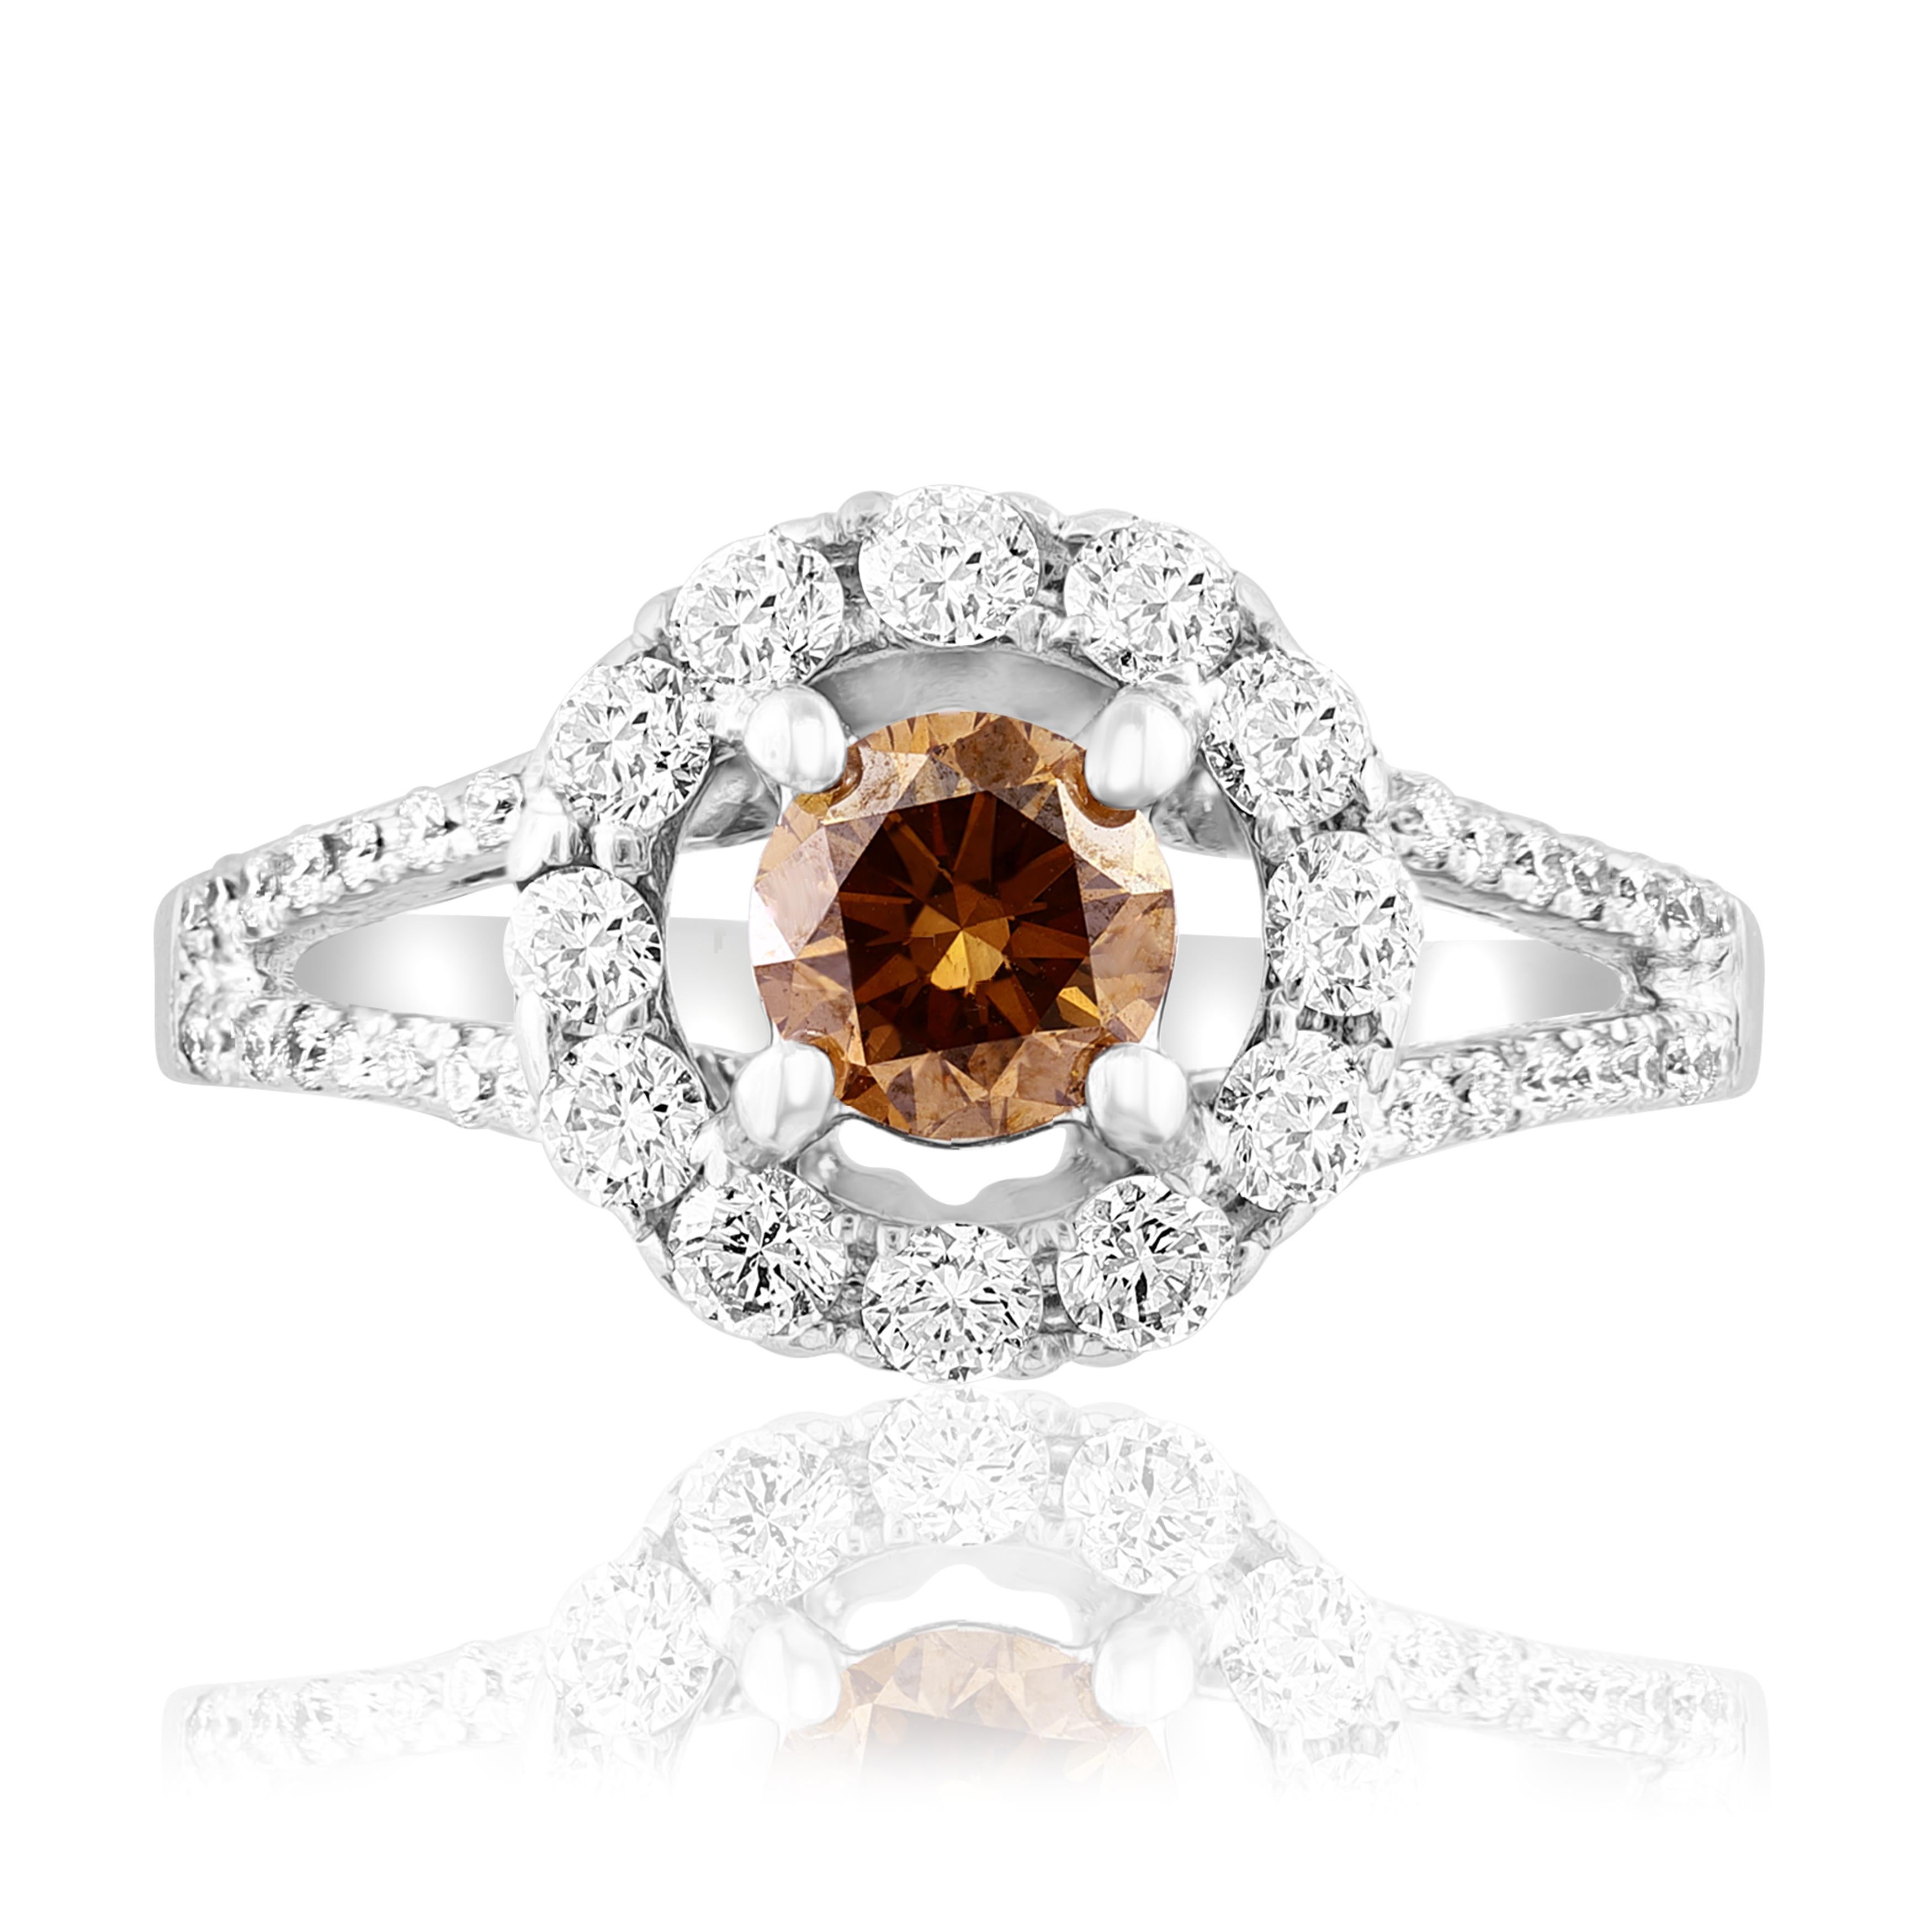 This classic Brilliant Cut Fancy Brown Diamond is 0.61 Carat. Brown Diamond as its center and is surrounded by 12 Round Cut Diamonds in 18K White Gold.